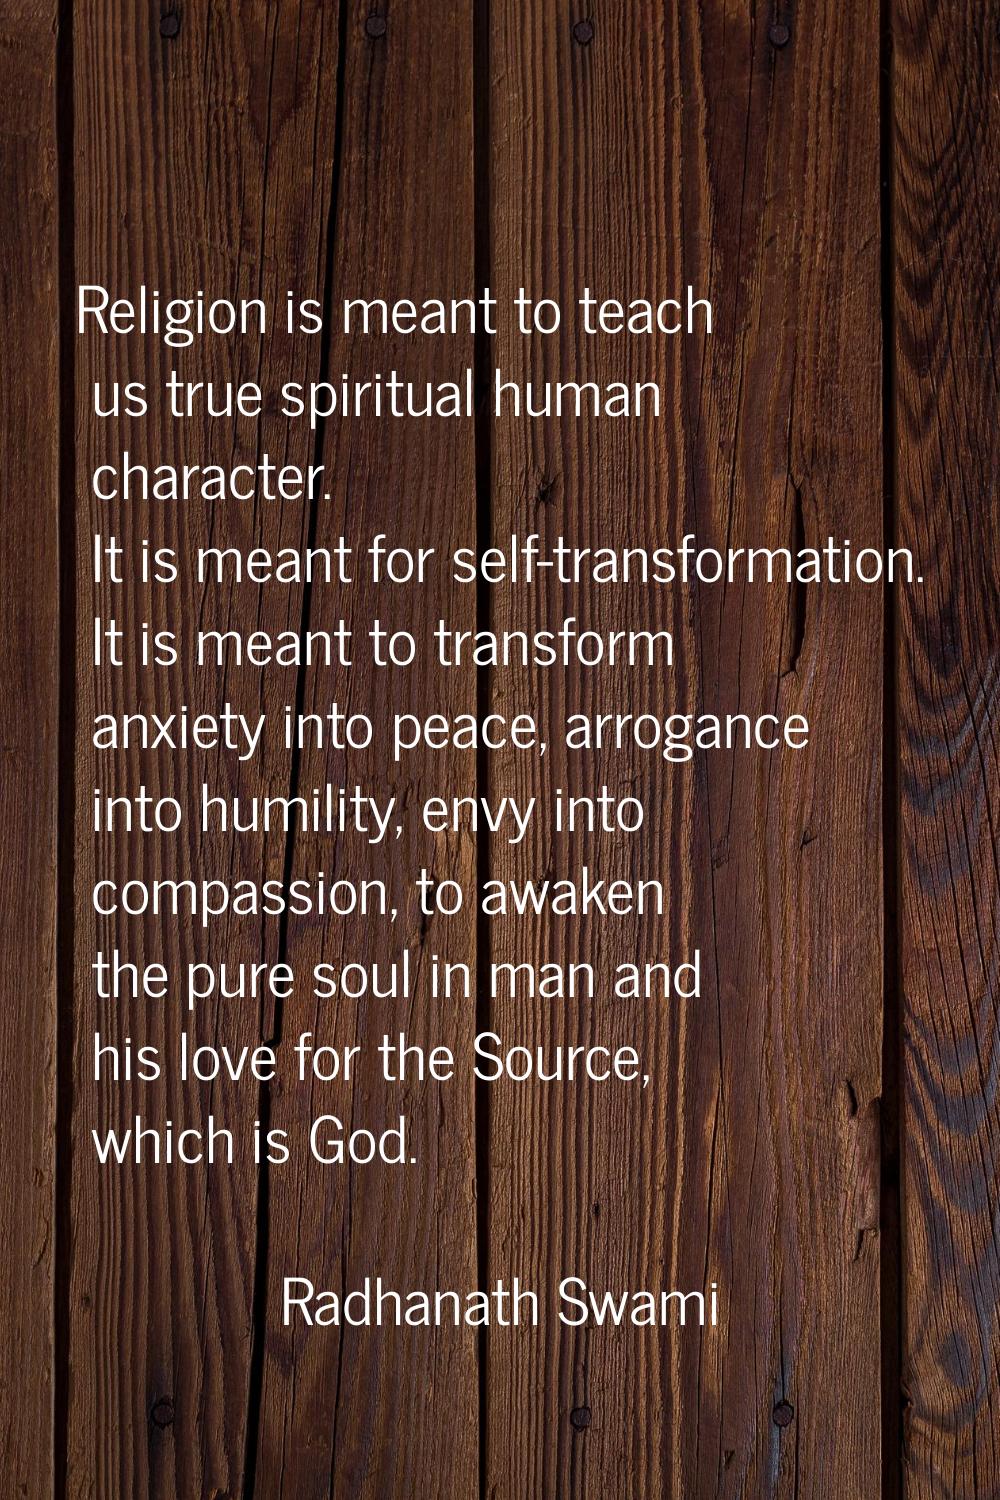 Religion is meant to teach us true spiritual human character. It is meant for self-transformation. 